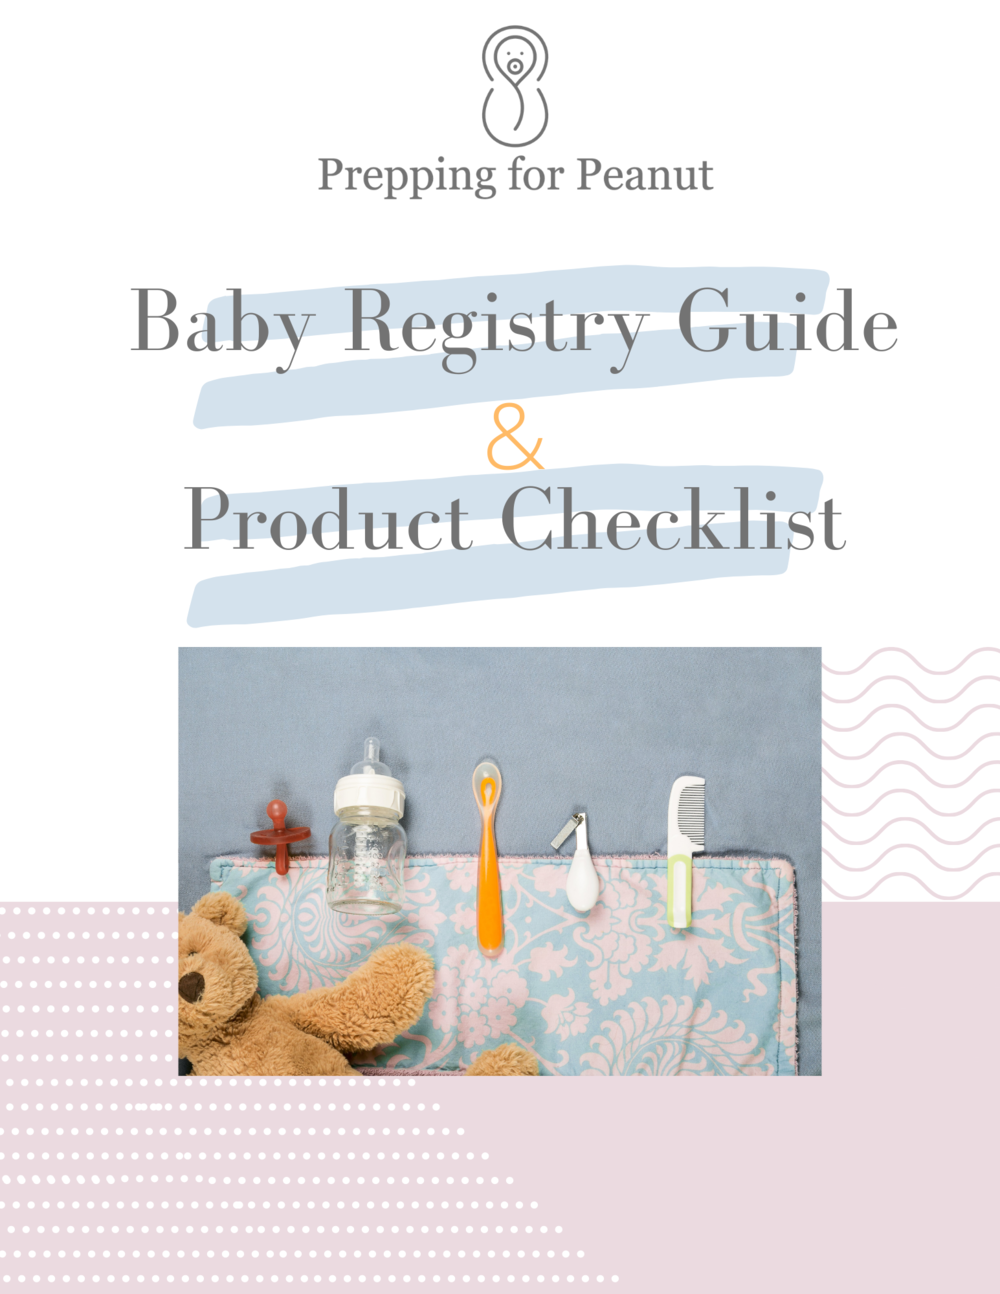 Baby Registry Checklist: Don't Forget the Toys!